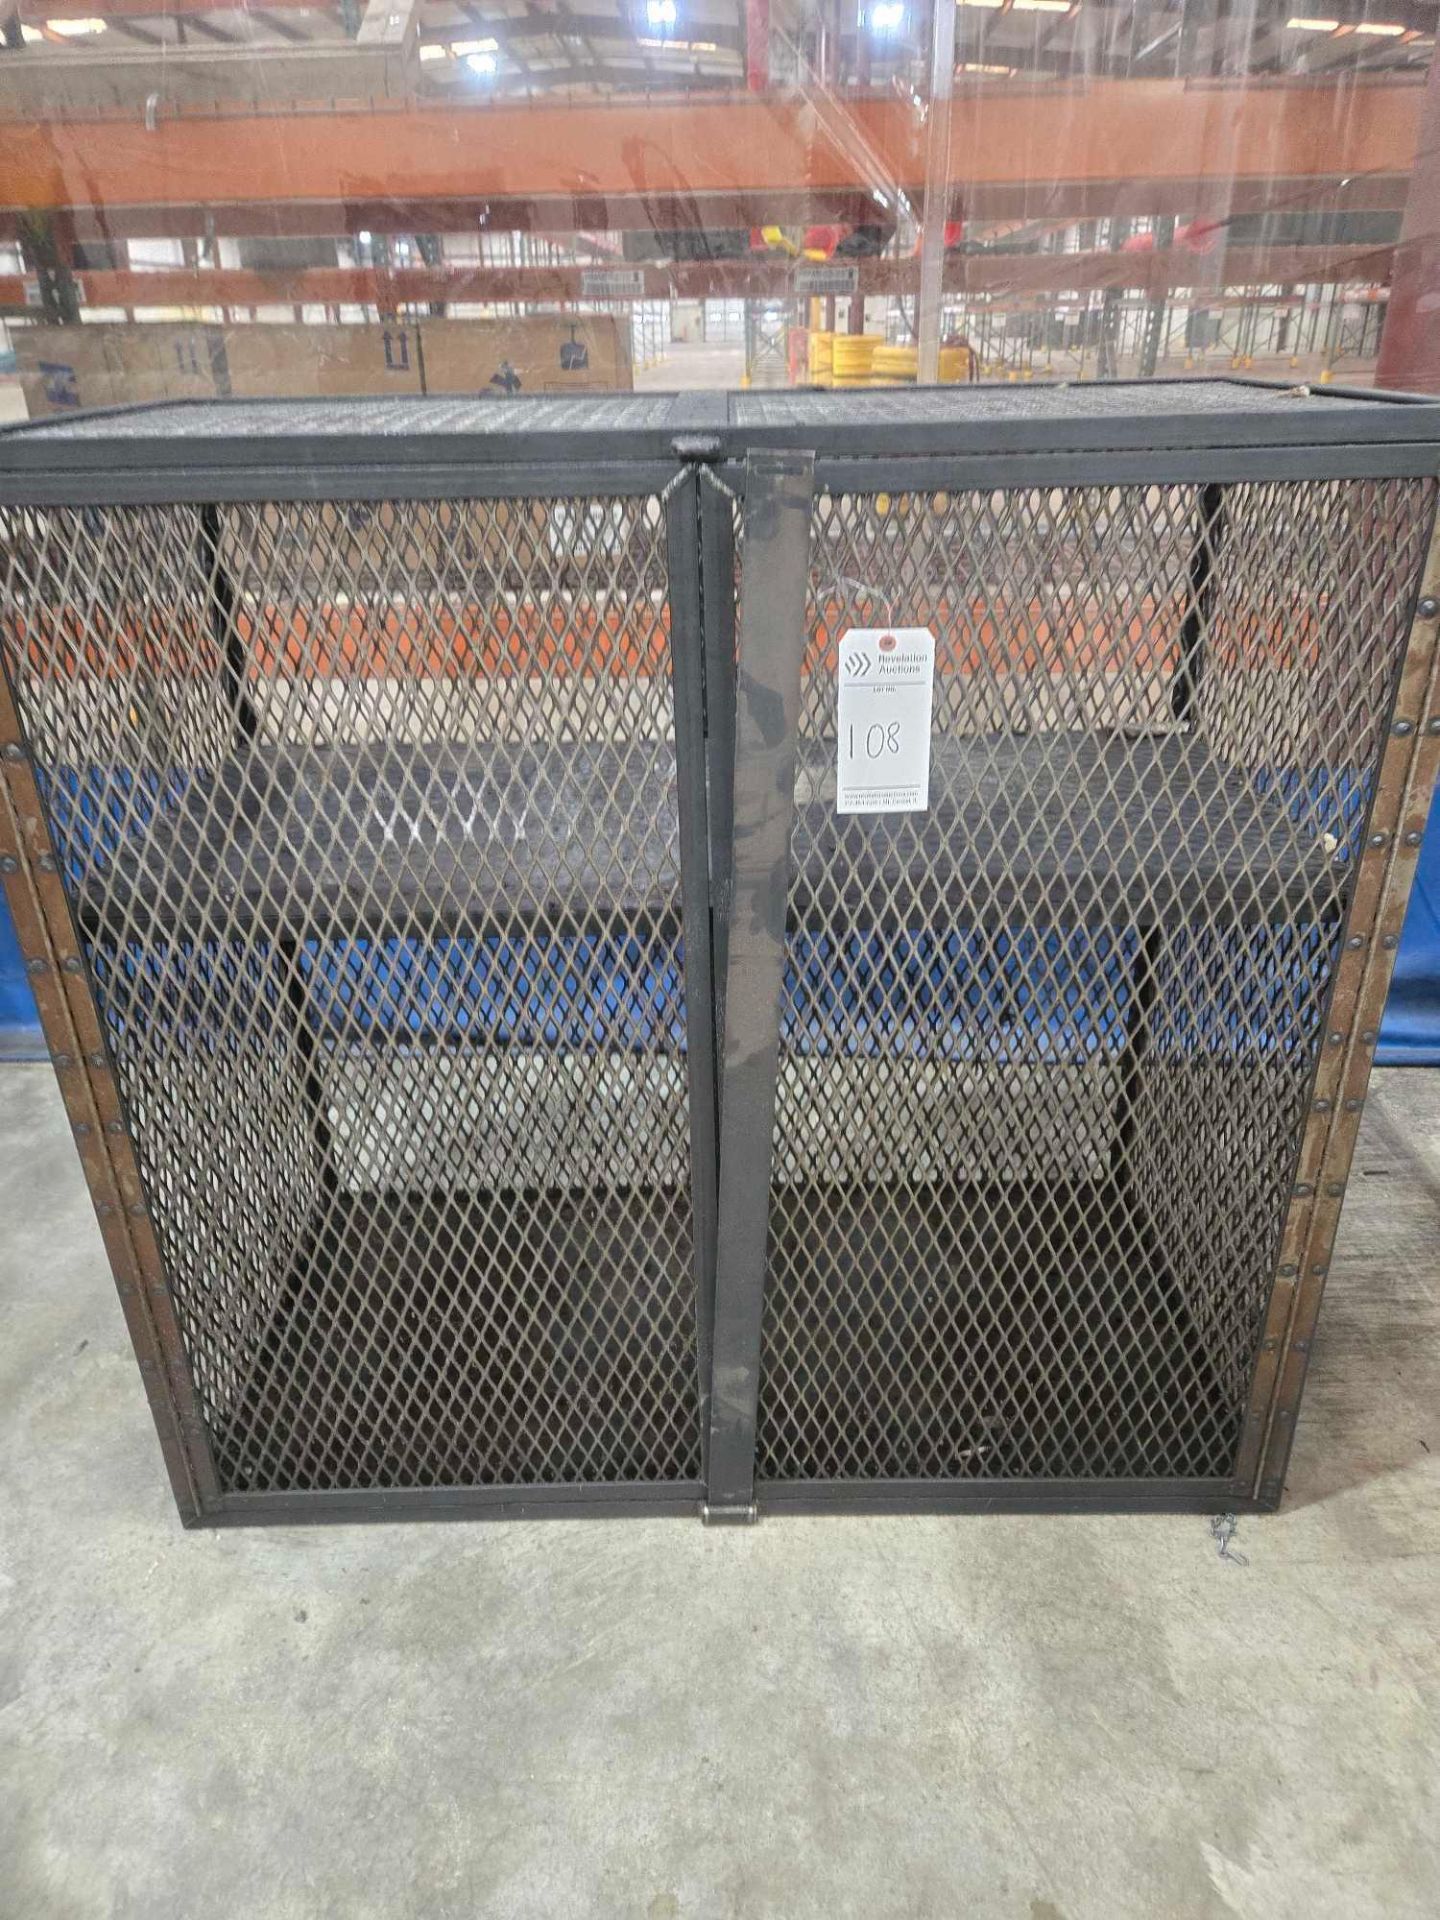 METAL SECURITY CAGE - Image 5 of 5